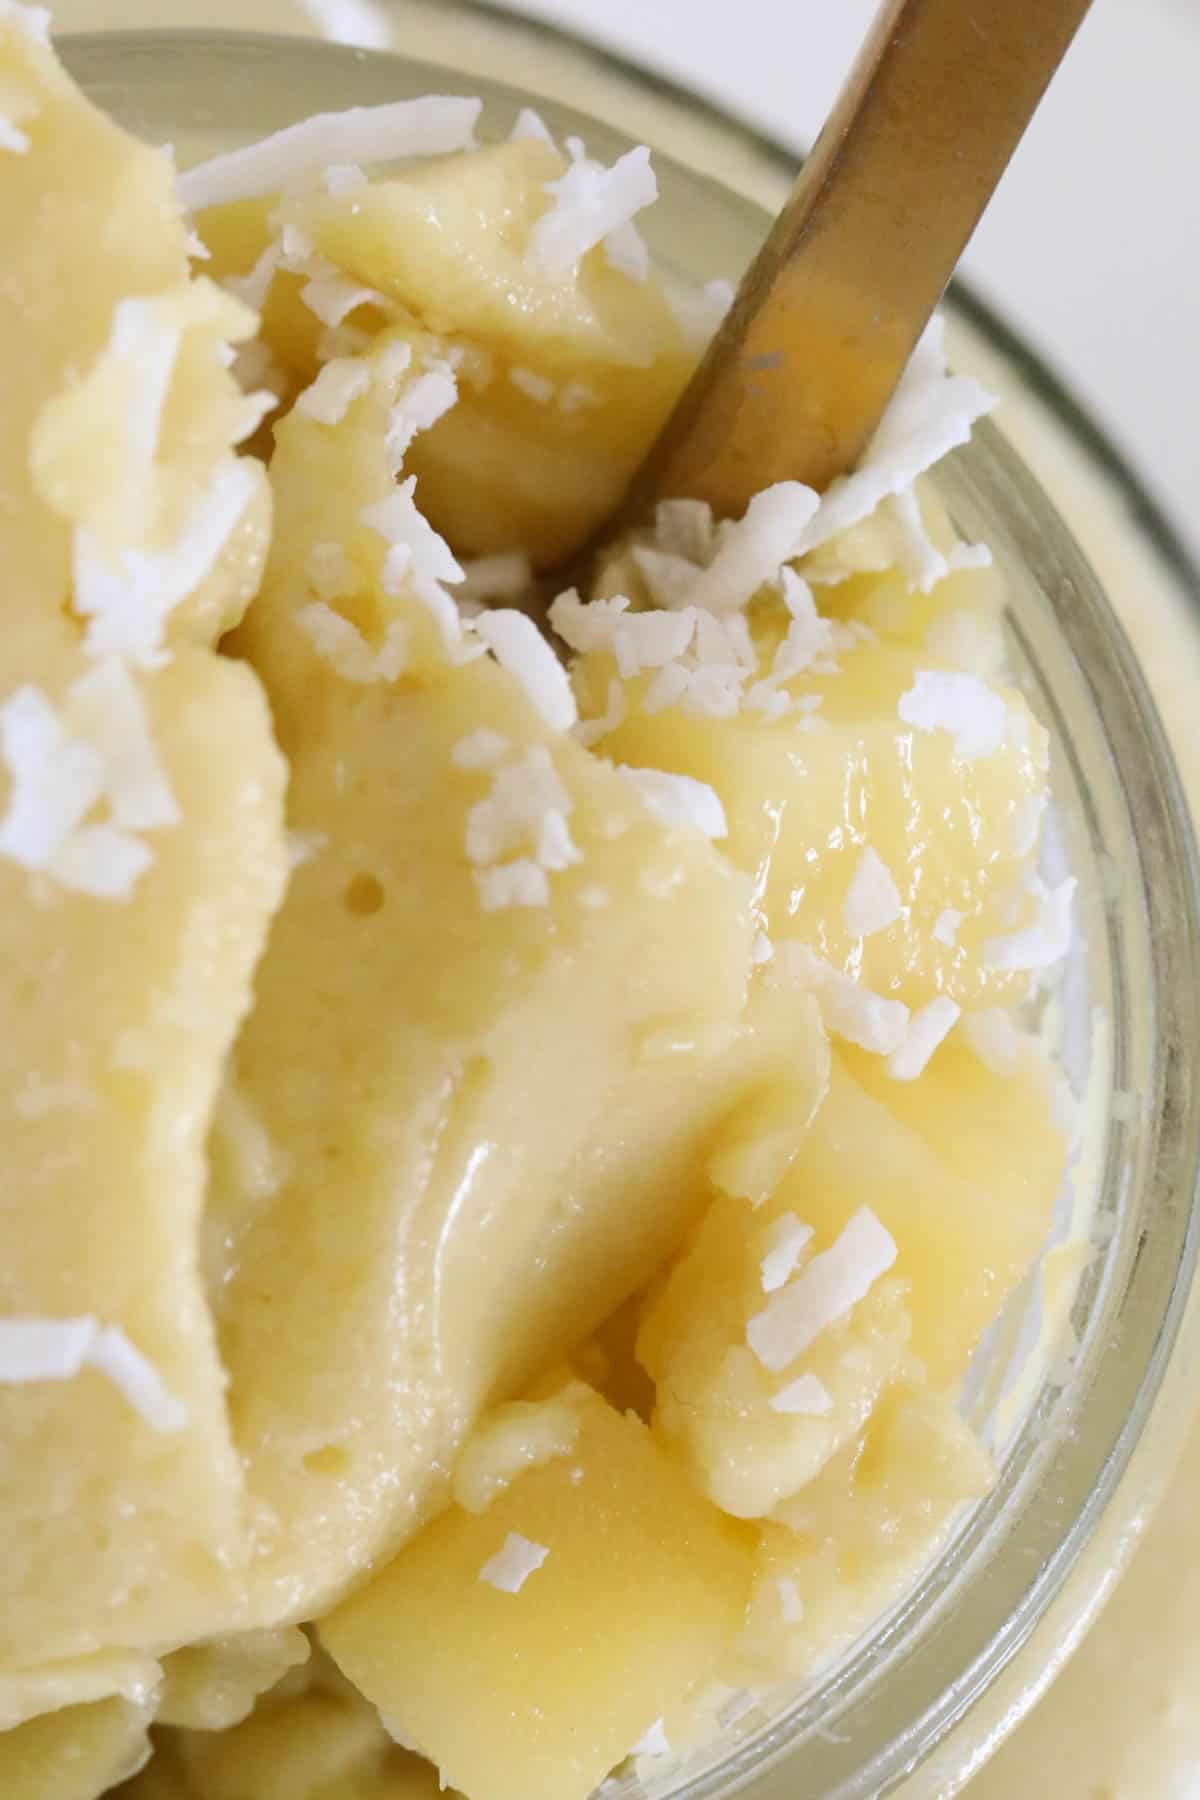 A close up view of mango pudding in a jar.